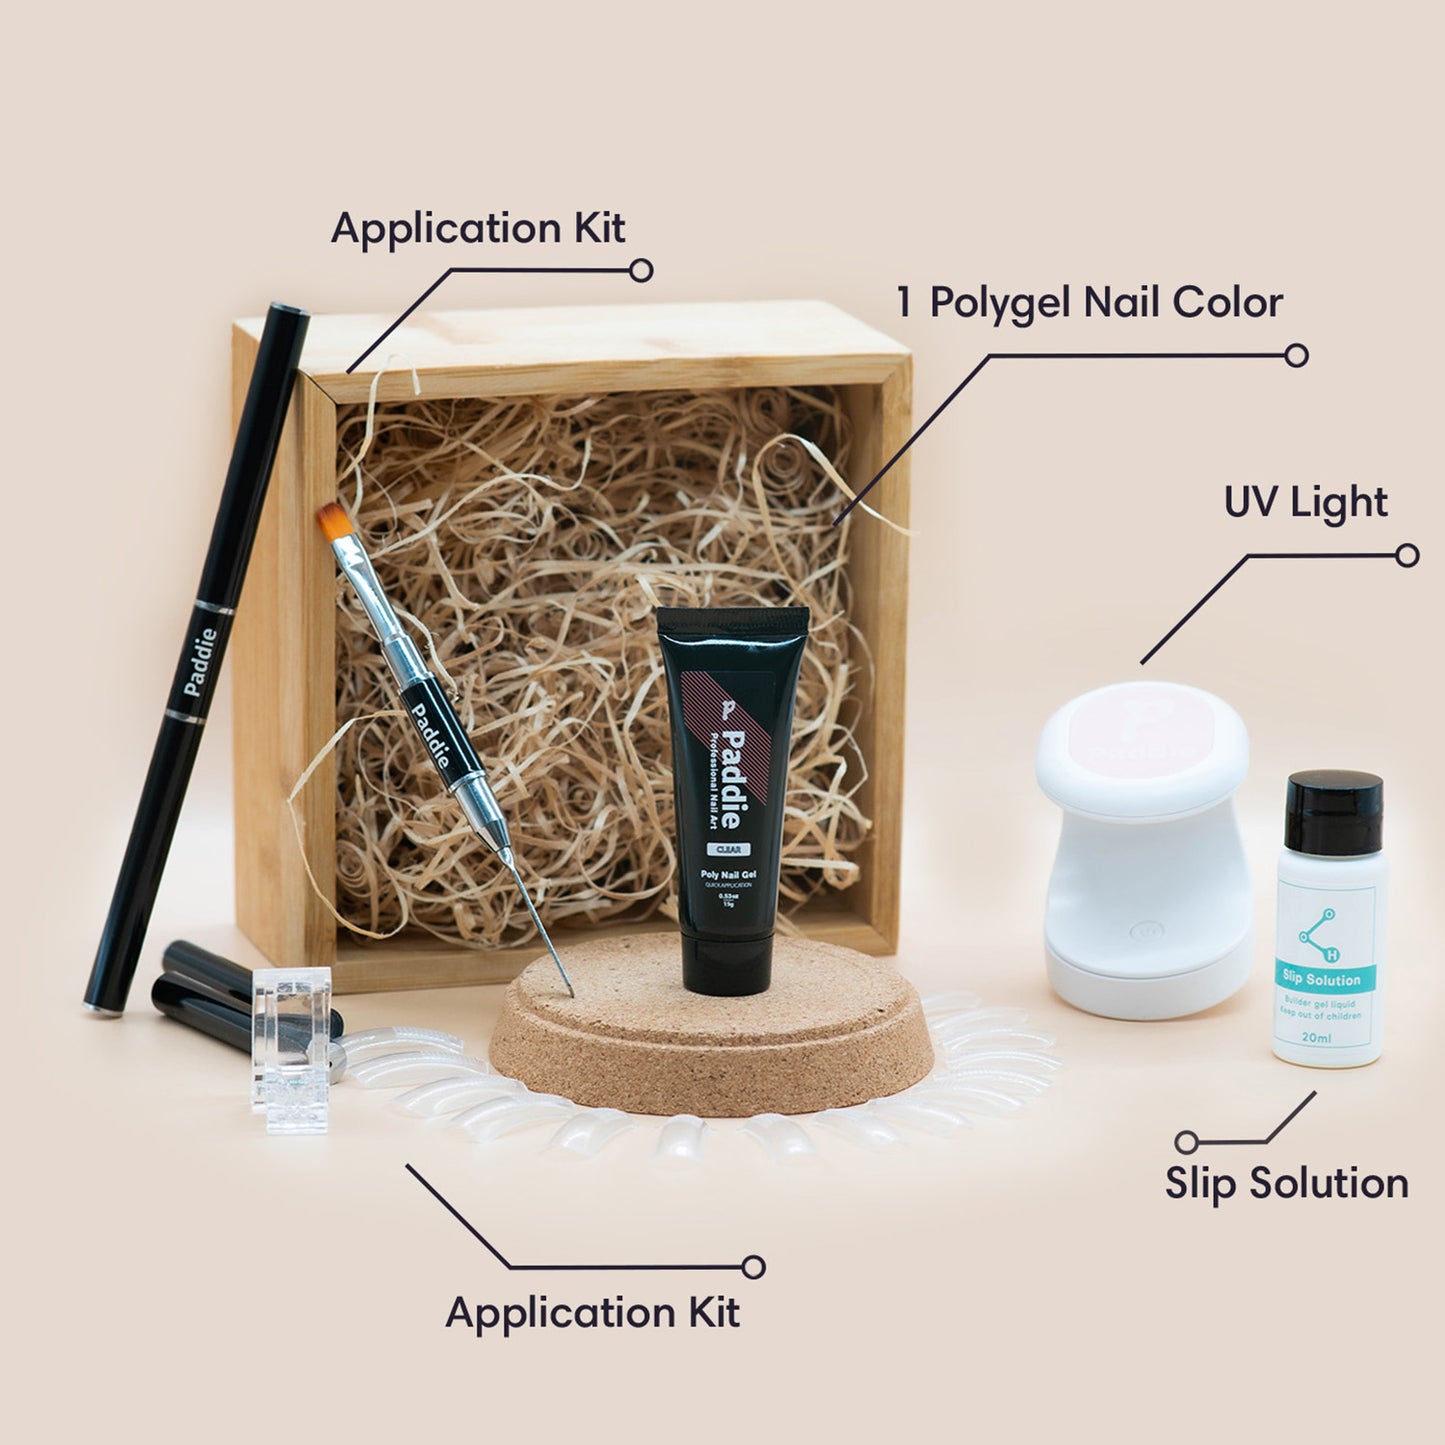 Polygel nail kit with essentials for DIY polygel nails. Includes 15g/0.5 oz polygel tube, 20 nail tips, nail clip, brush + cuticle pusher, slip solution, instructions booklet, free UV light.